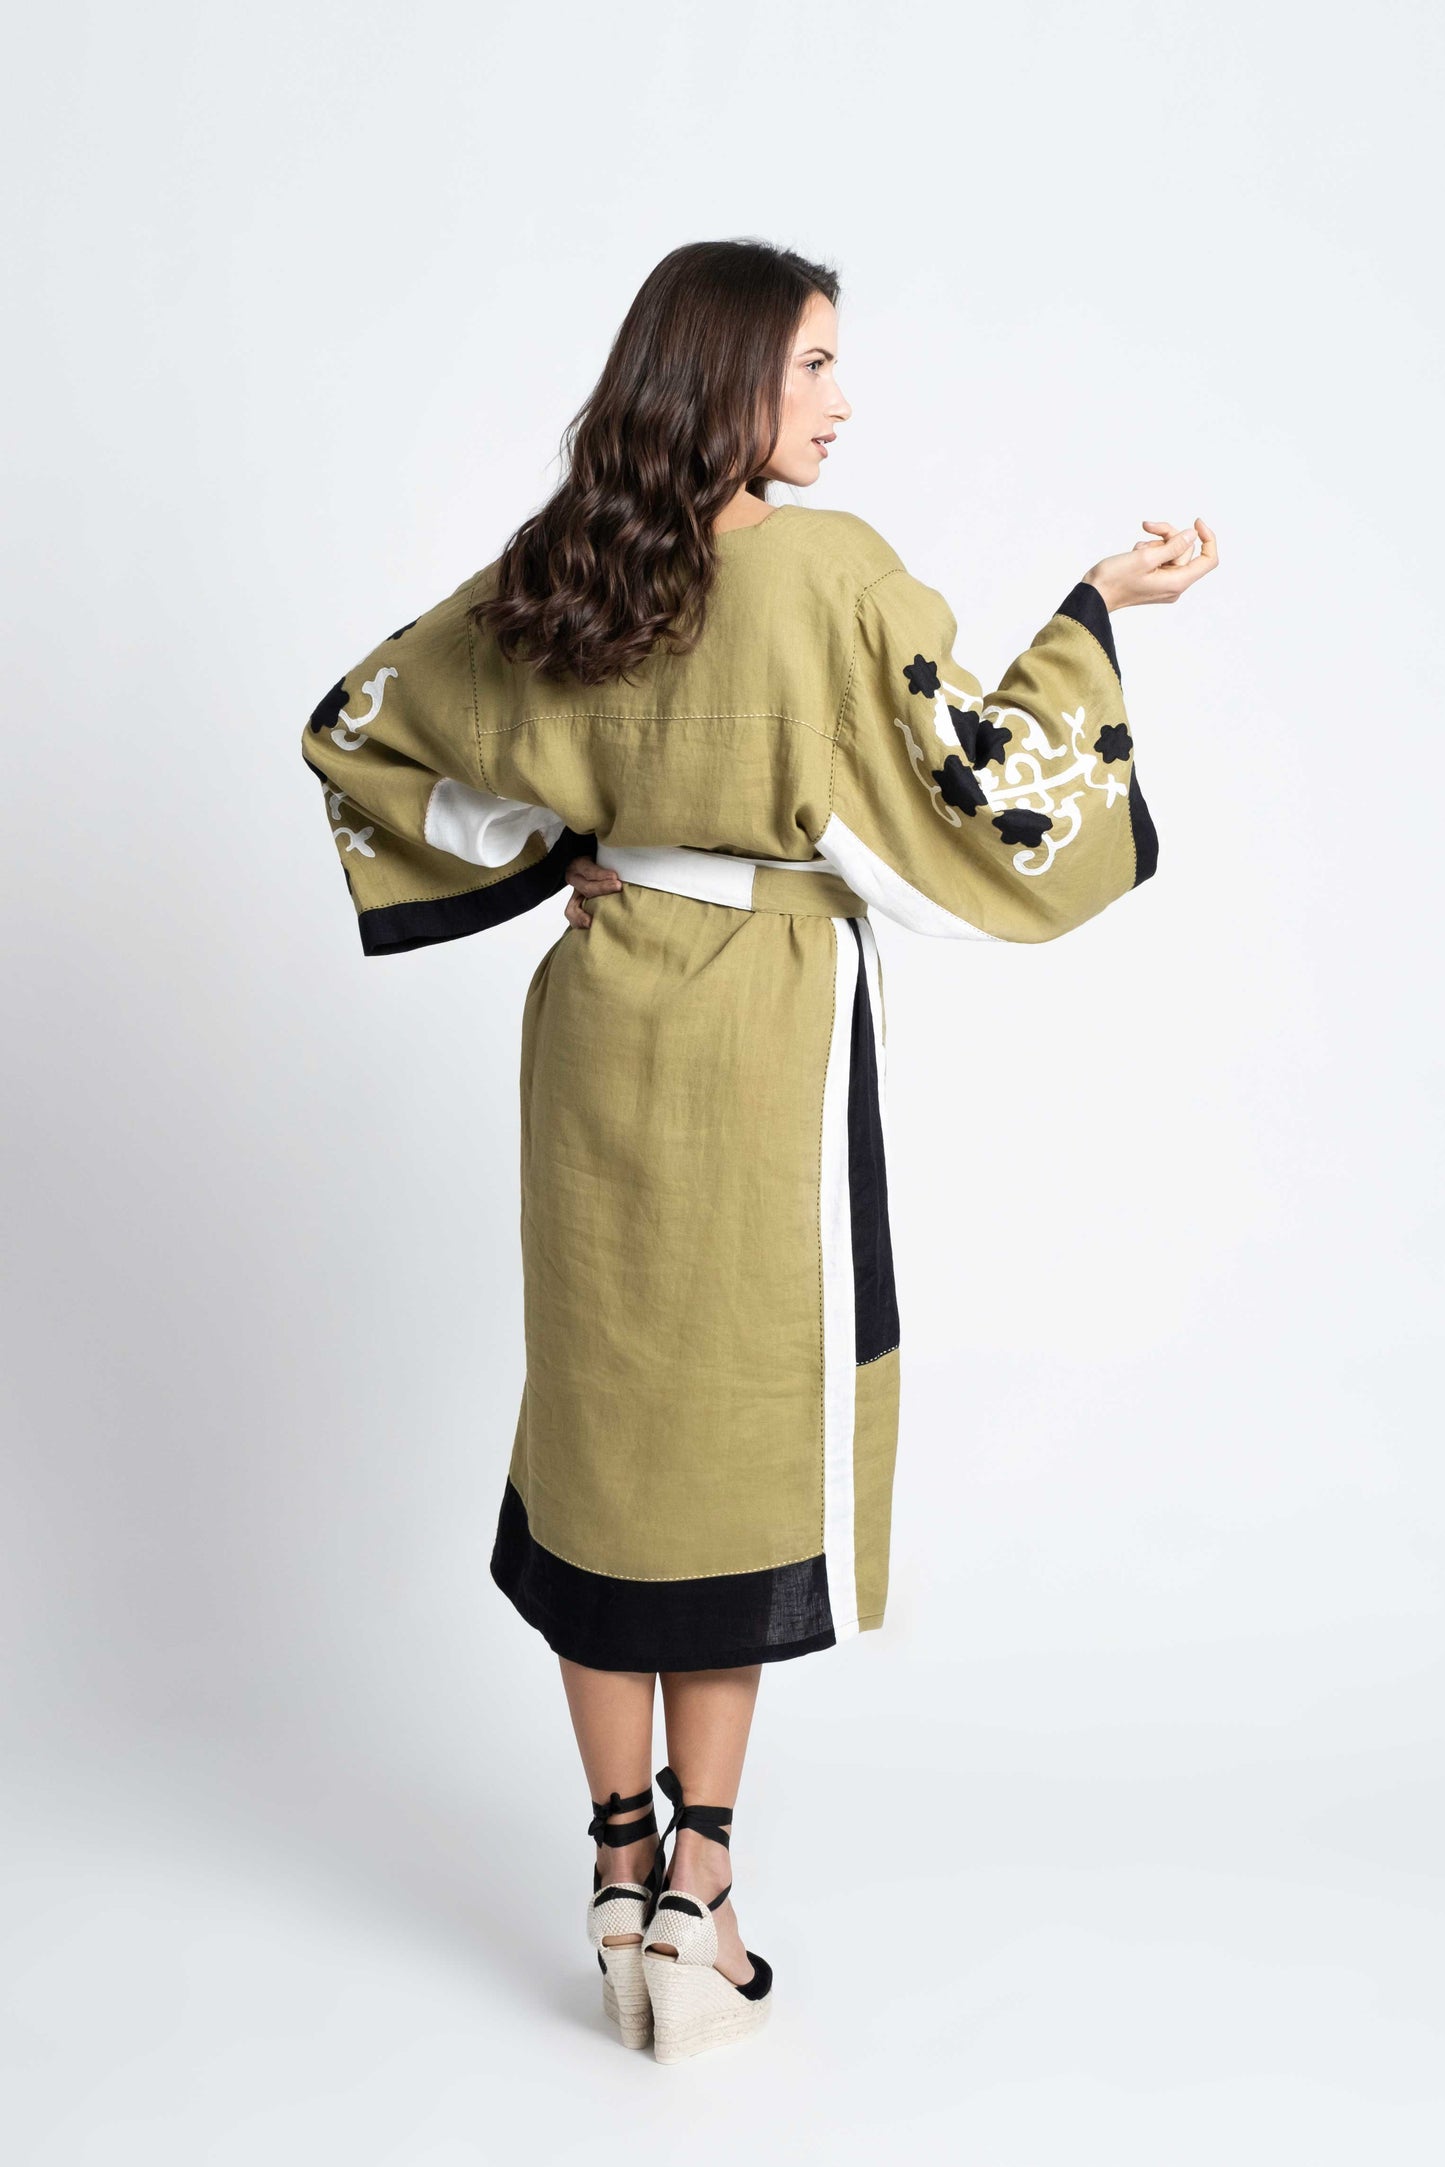 Olive linen belted dress embroidered in black and white.